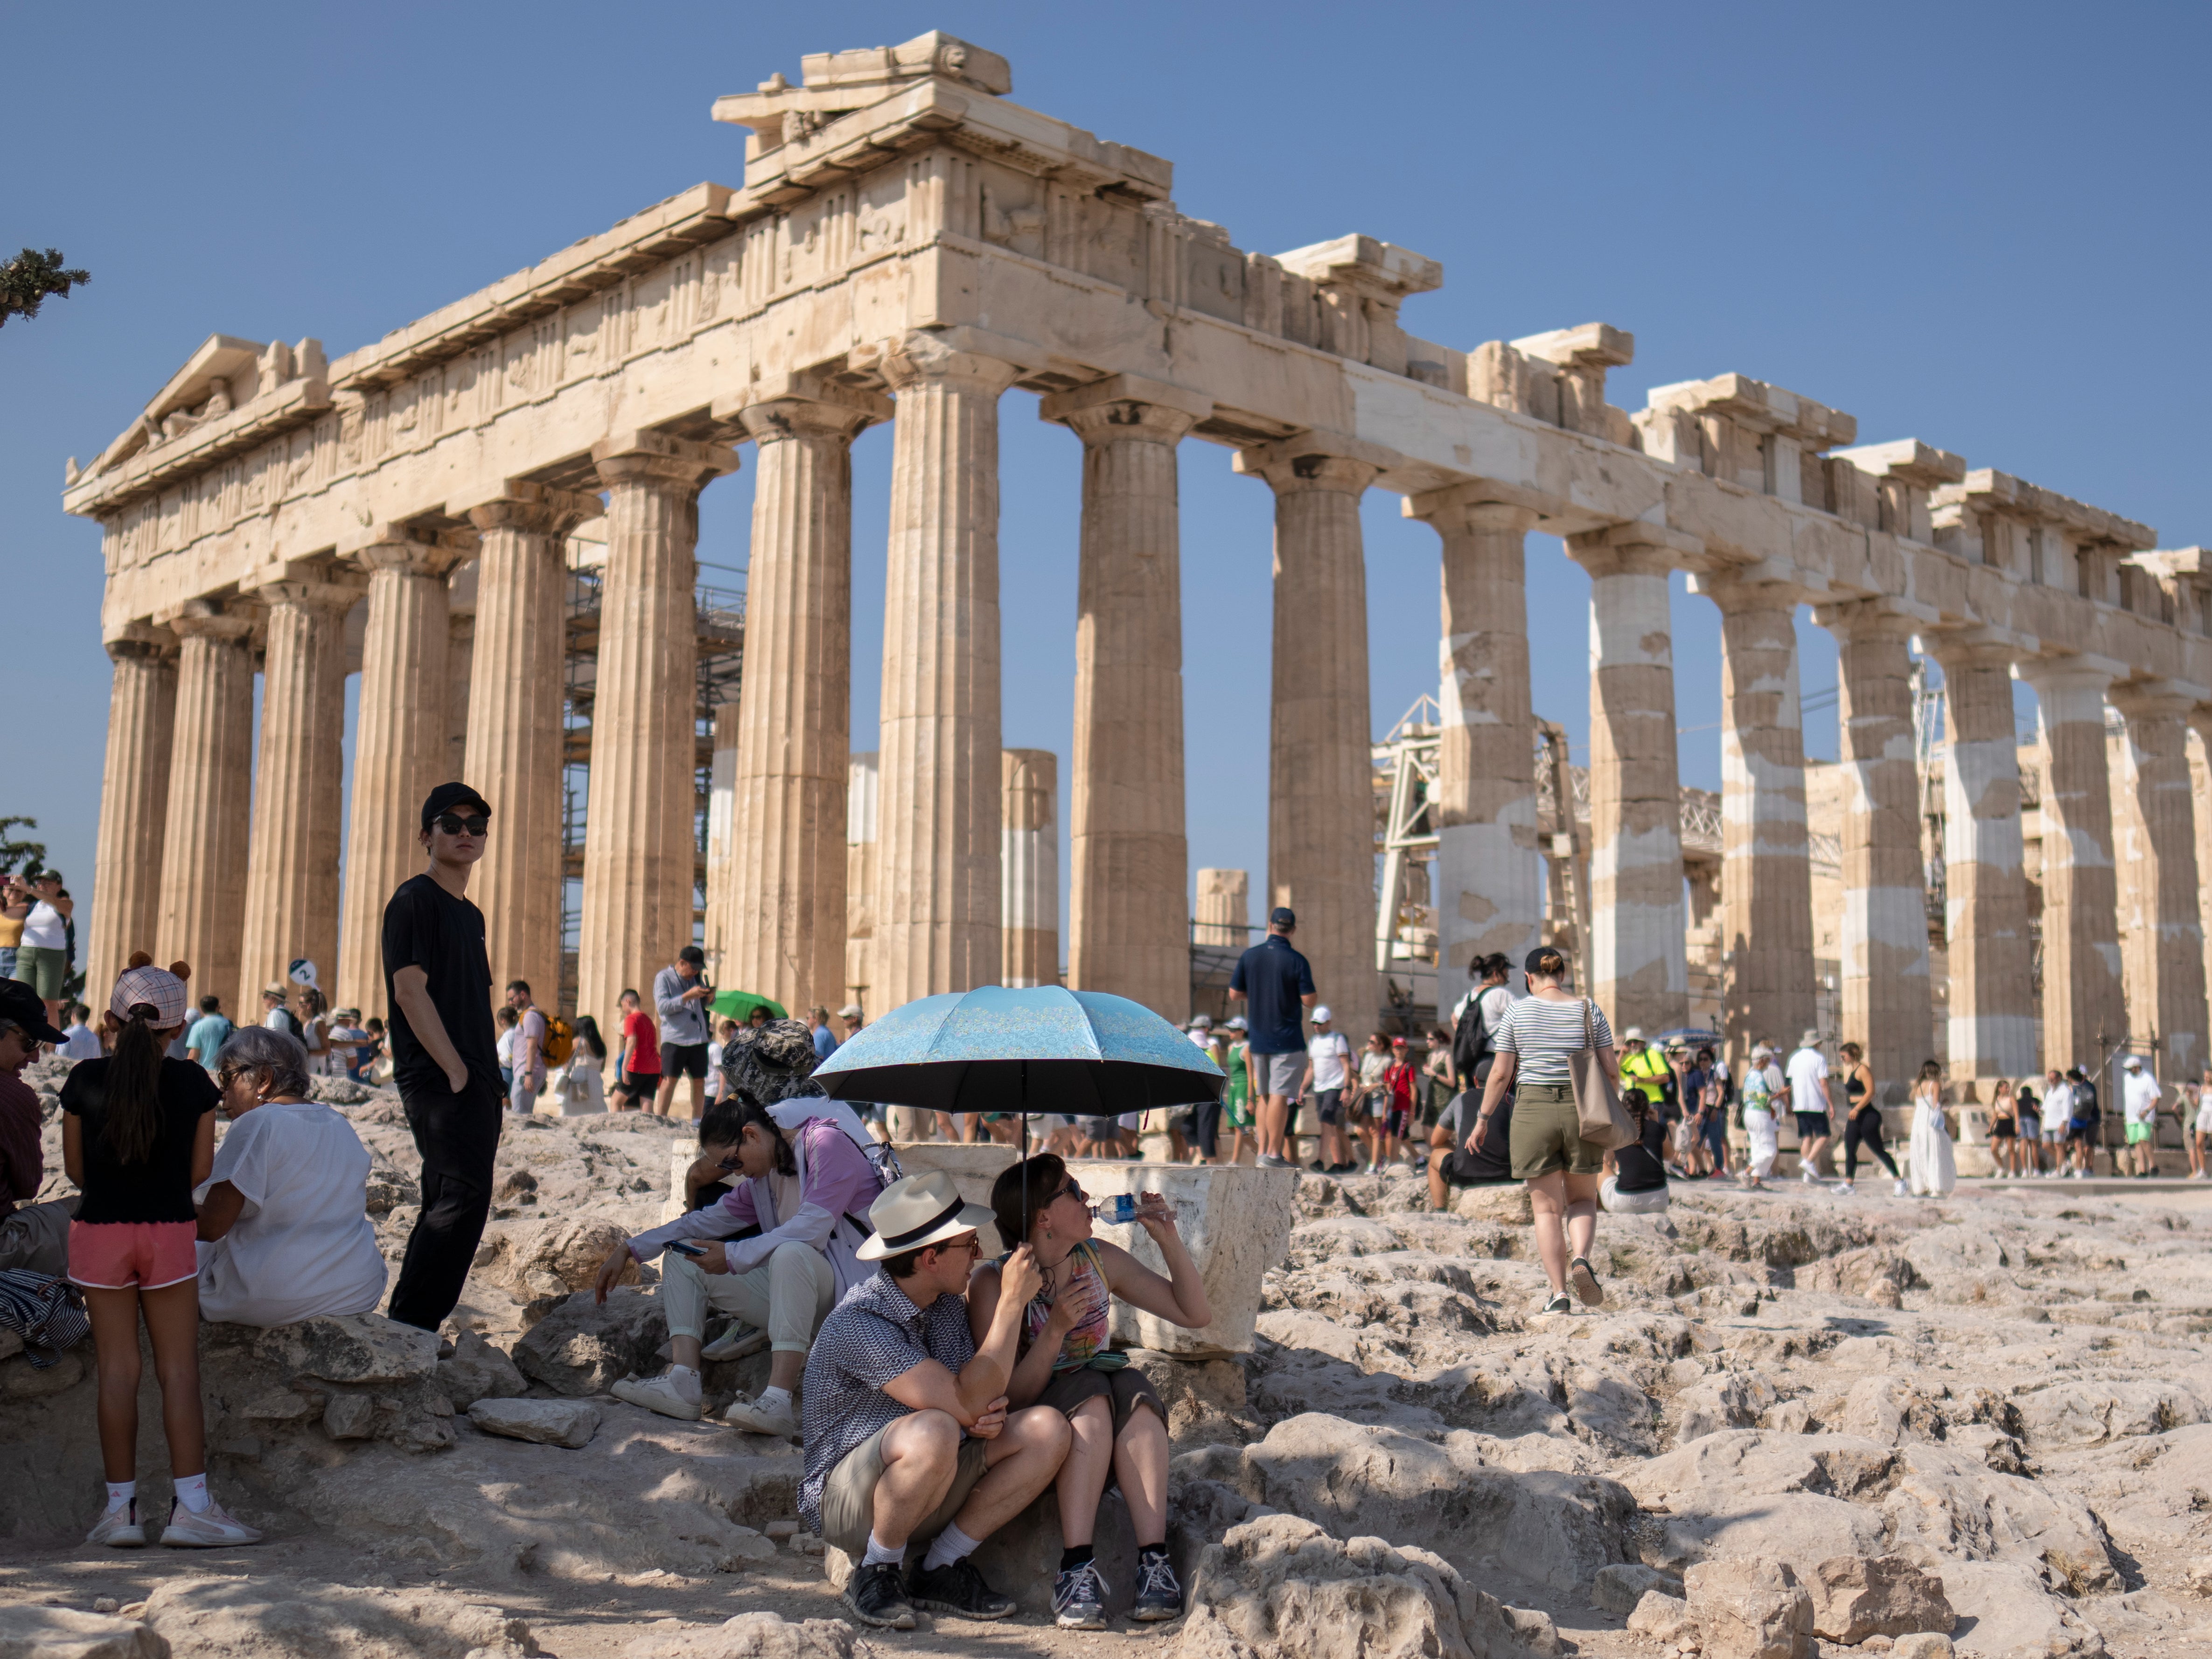 Tourists used umbrellas for shade at the Parthenon